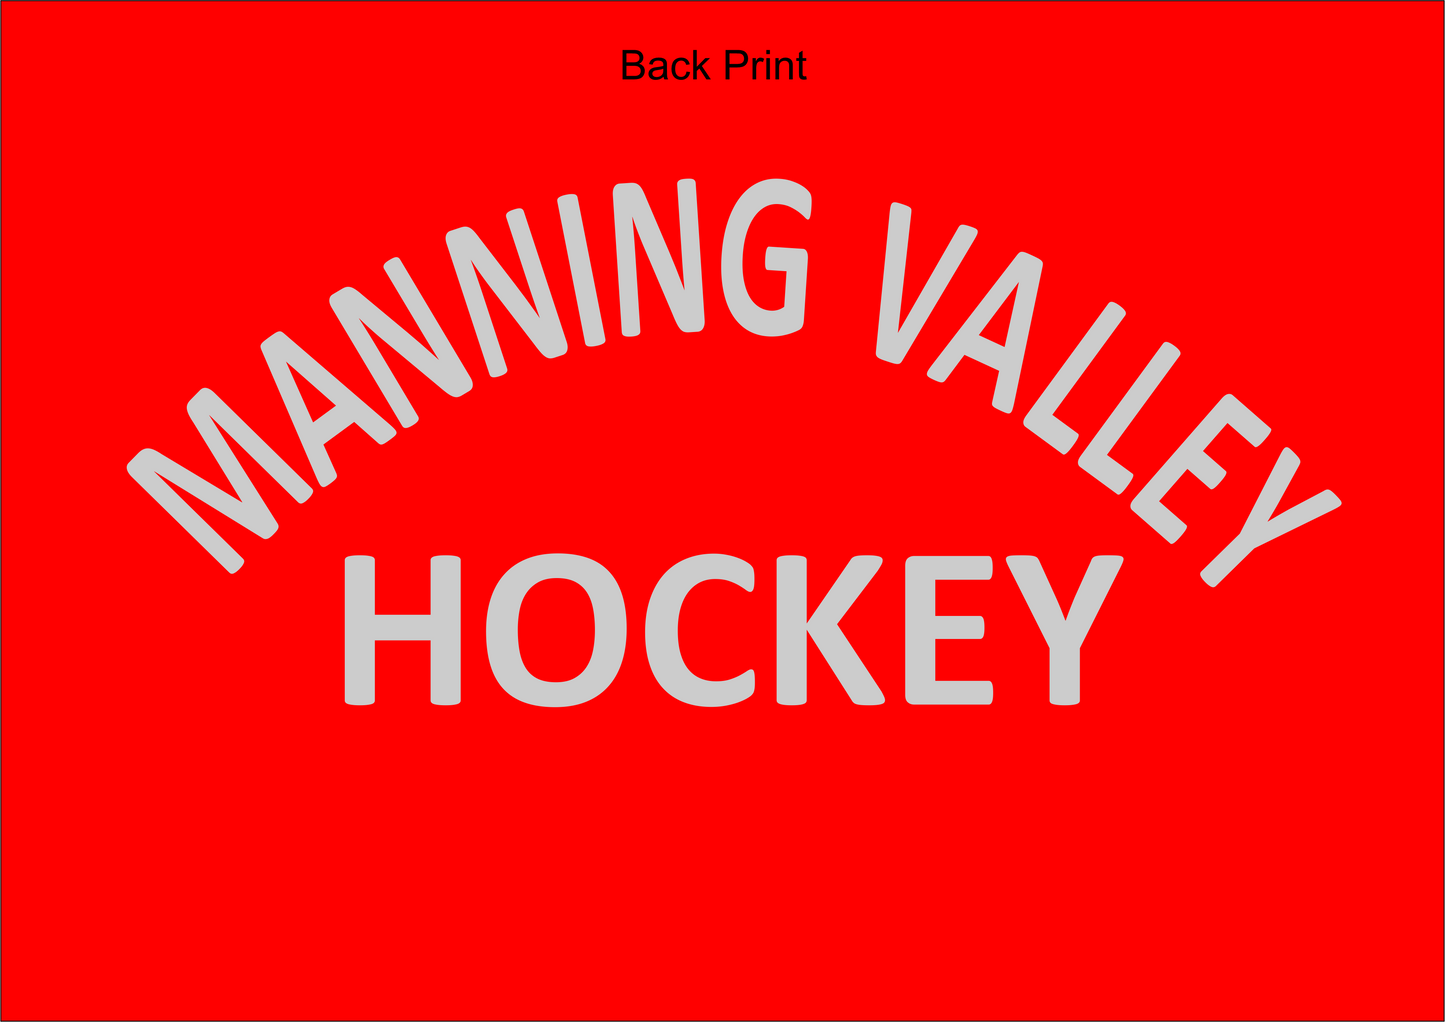 Manning Valley Hockey Adult Tracktop